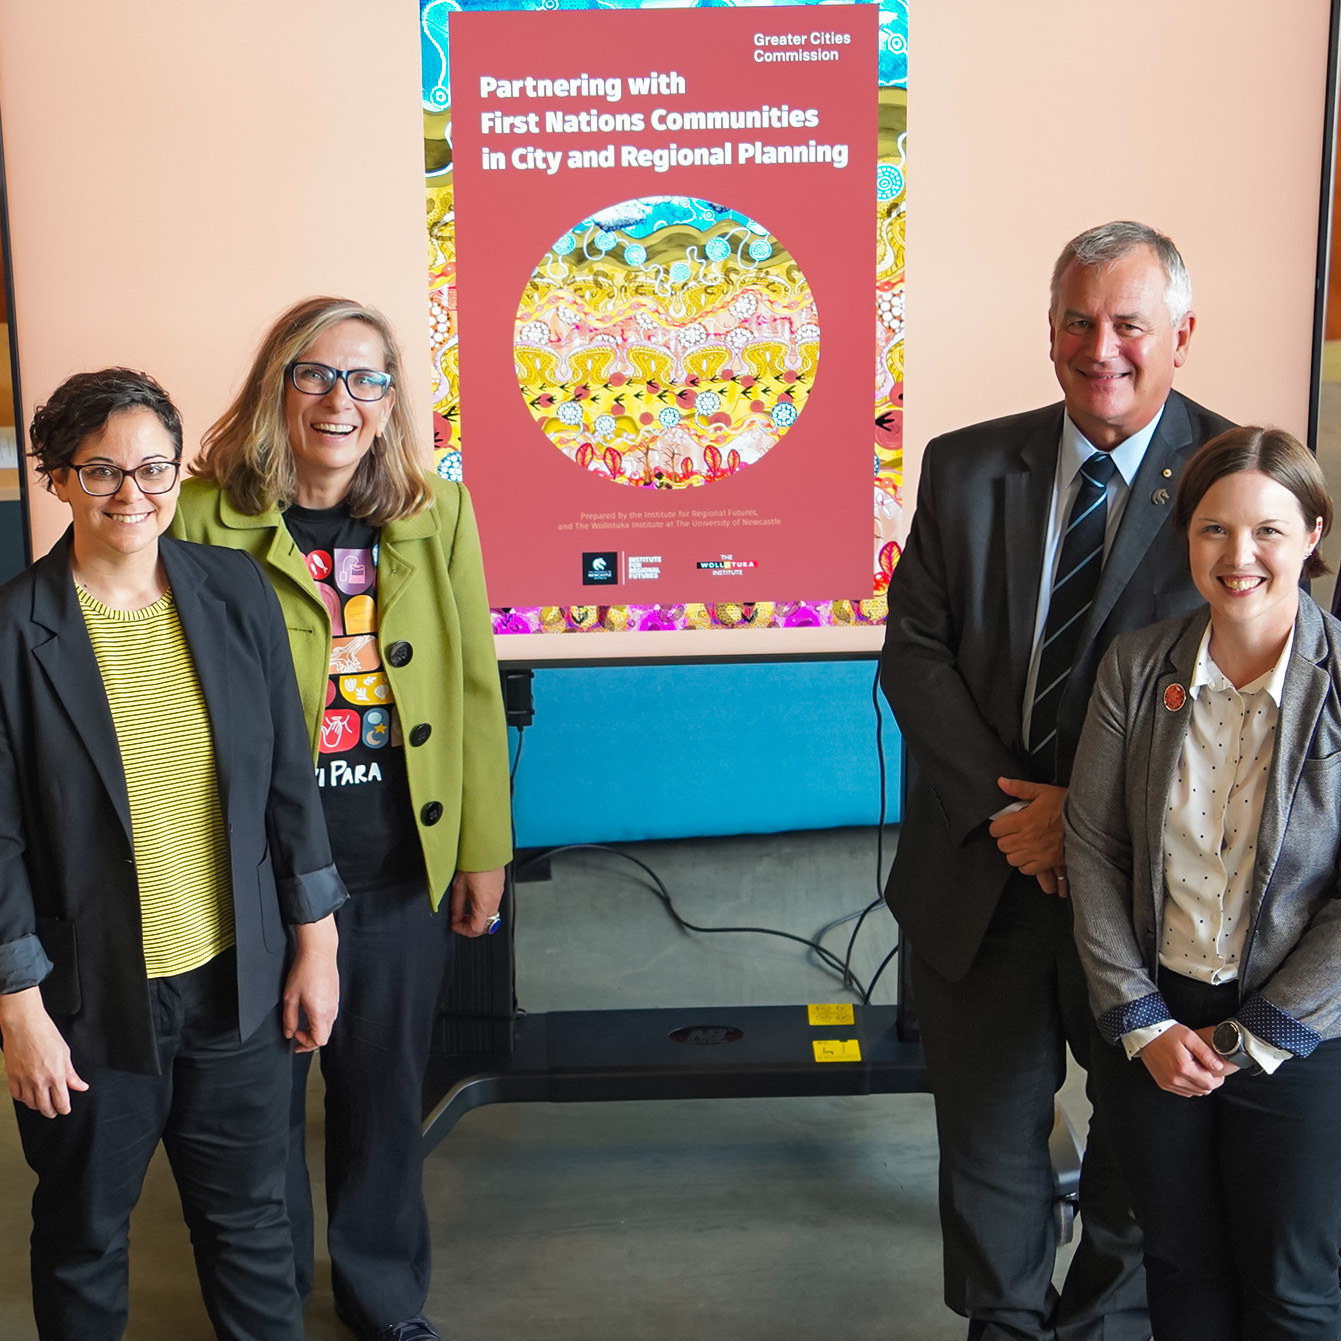 Members from the Greater Cities Commission, University of Newcastle's Wollotuka Institute and the Institute for Regional Futures group together for a photo at the launch^empty:{ds__assetid^as_asset:asset_name}